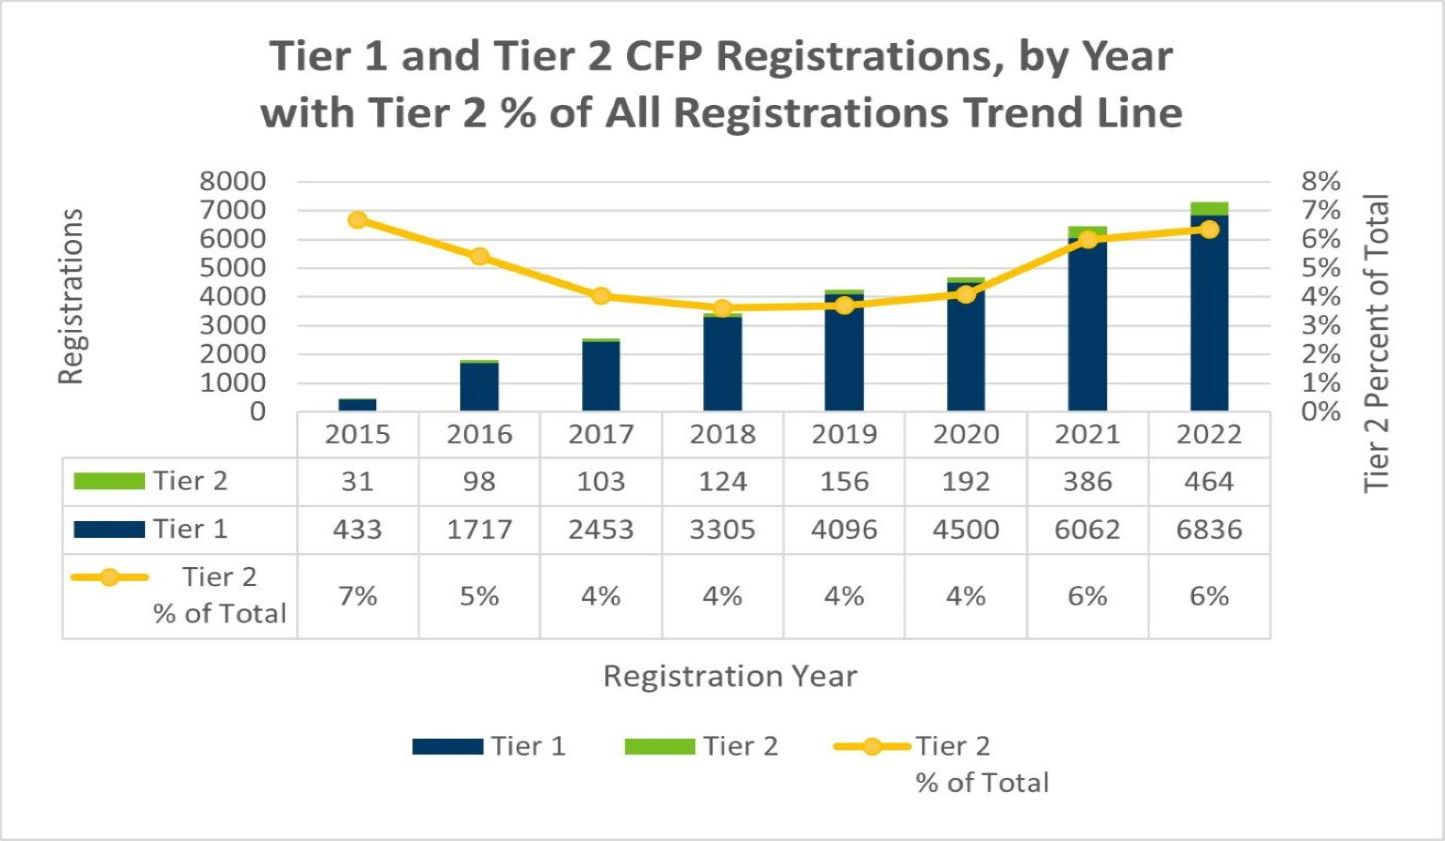 Tier 1 and Tier 2 Cottage Food Registrations Trend Line